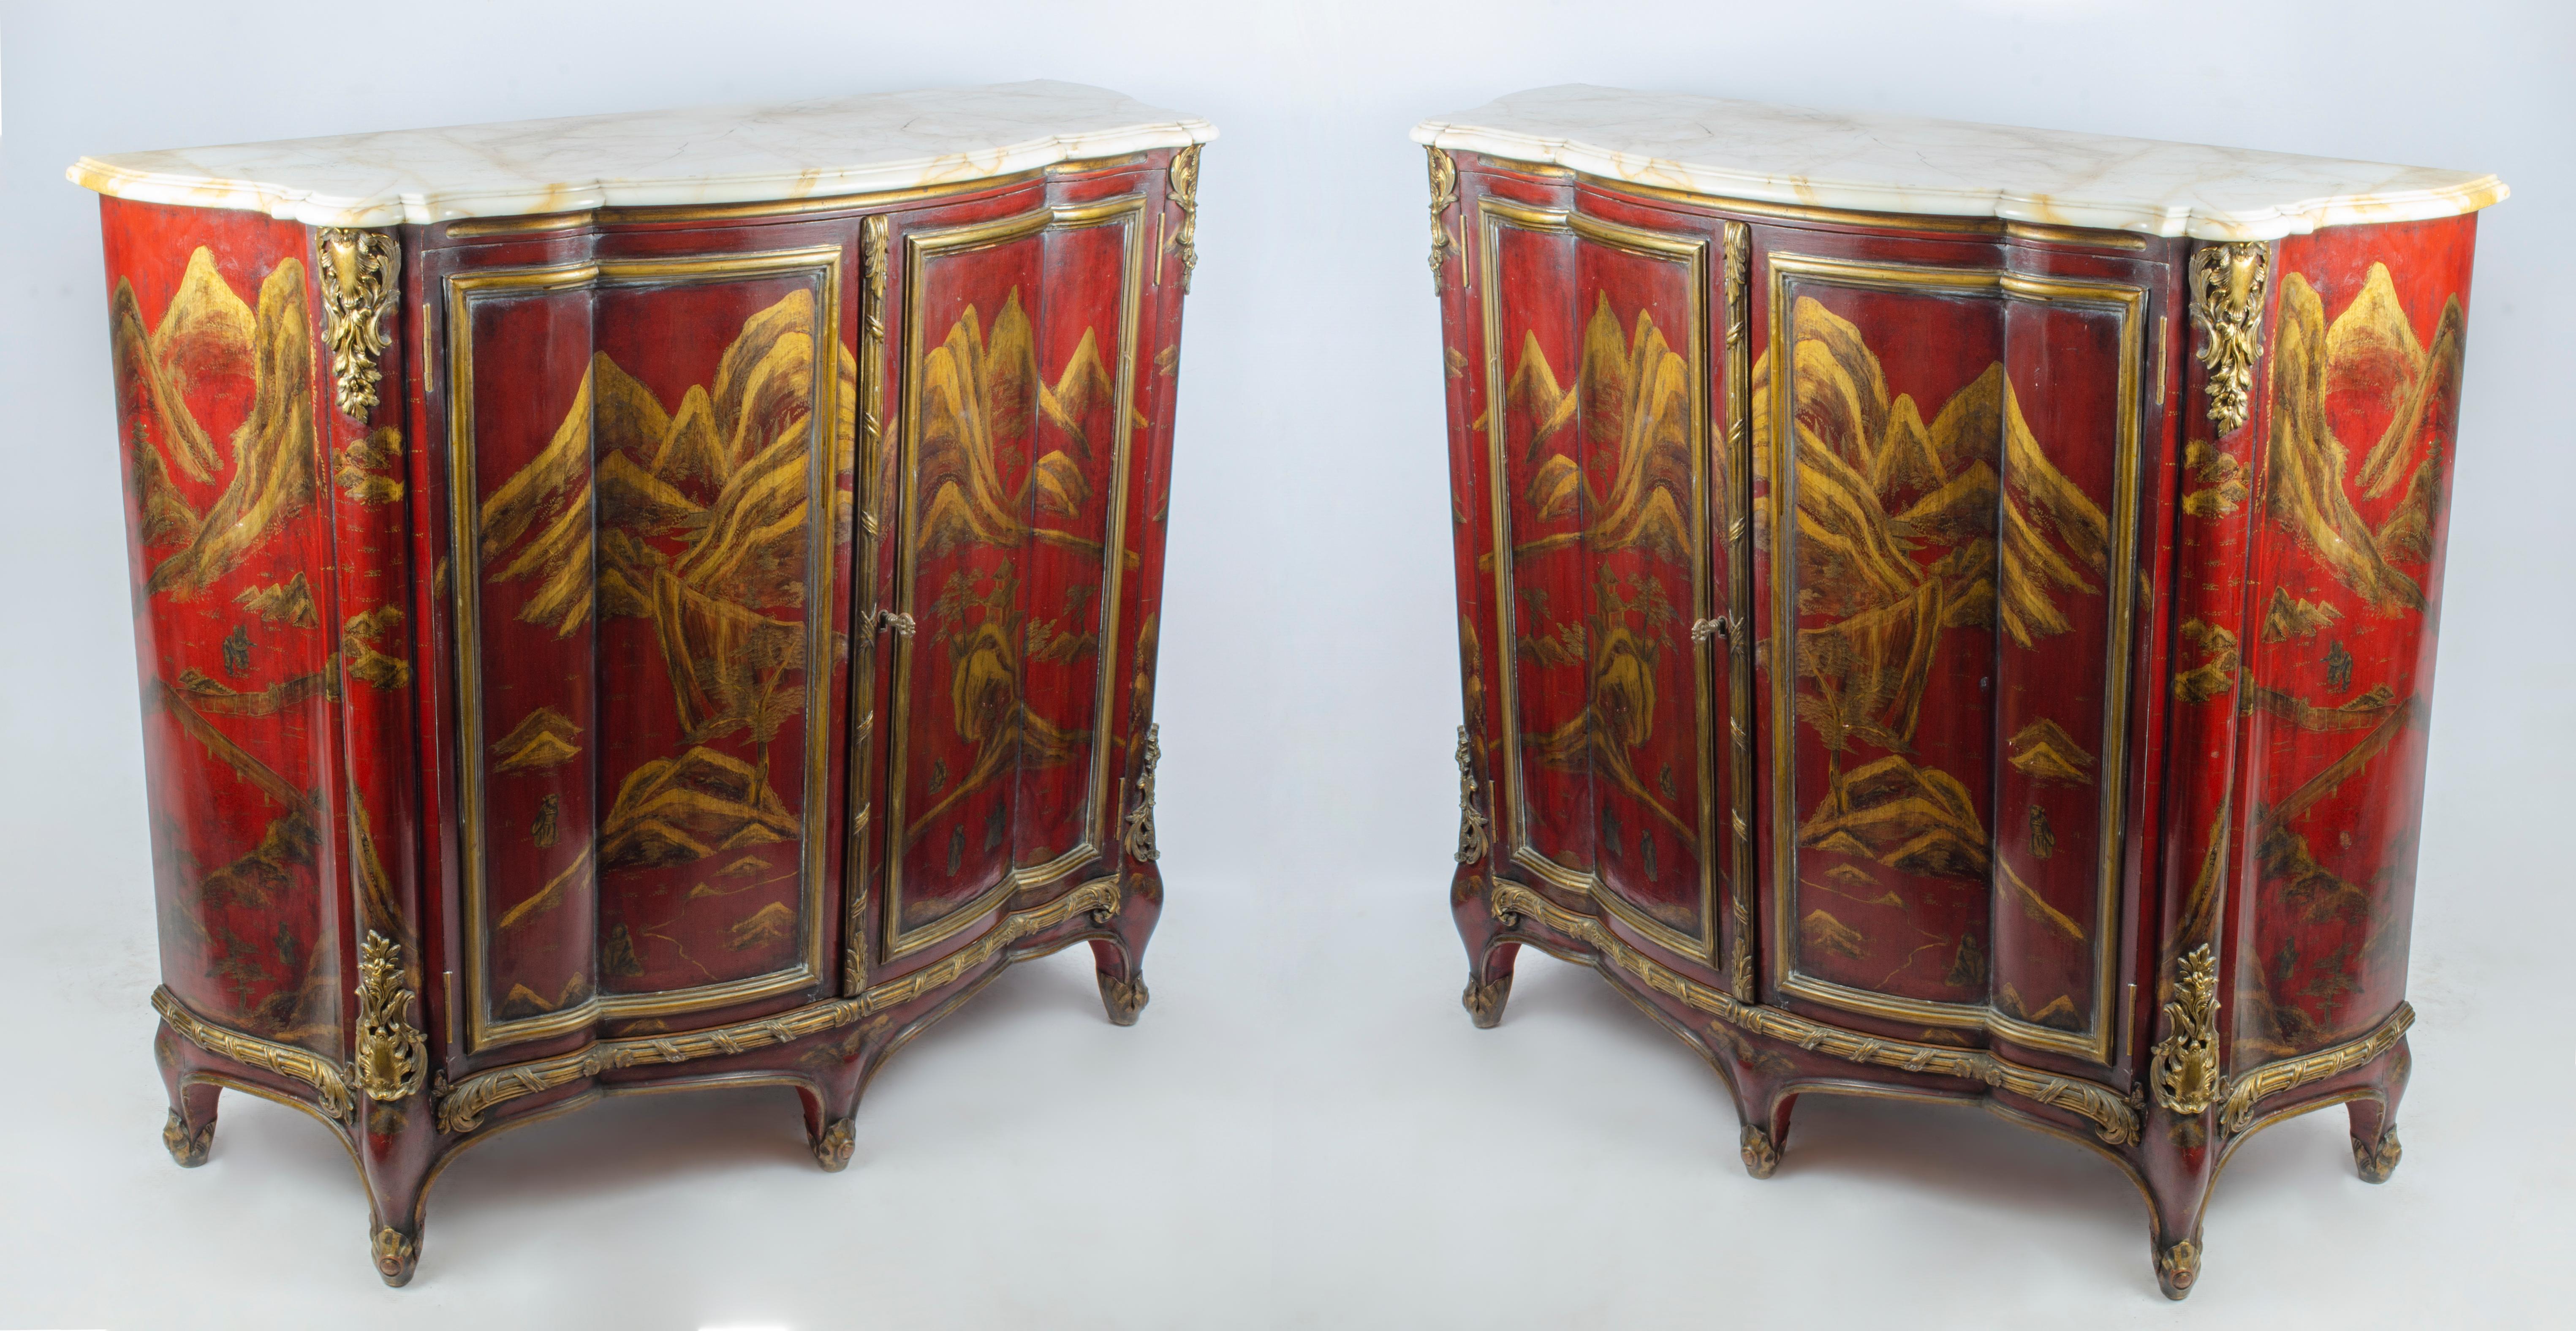 Pair of red lacquered cabinets with chinoiserie designs in gold, with bronze details and European marble top and interior with shelf. Made by Maison Jansen (1880-1989). Signed Jansen.

France, CIRCA 1930.